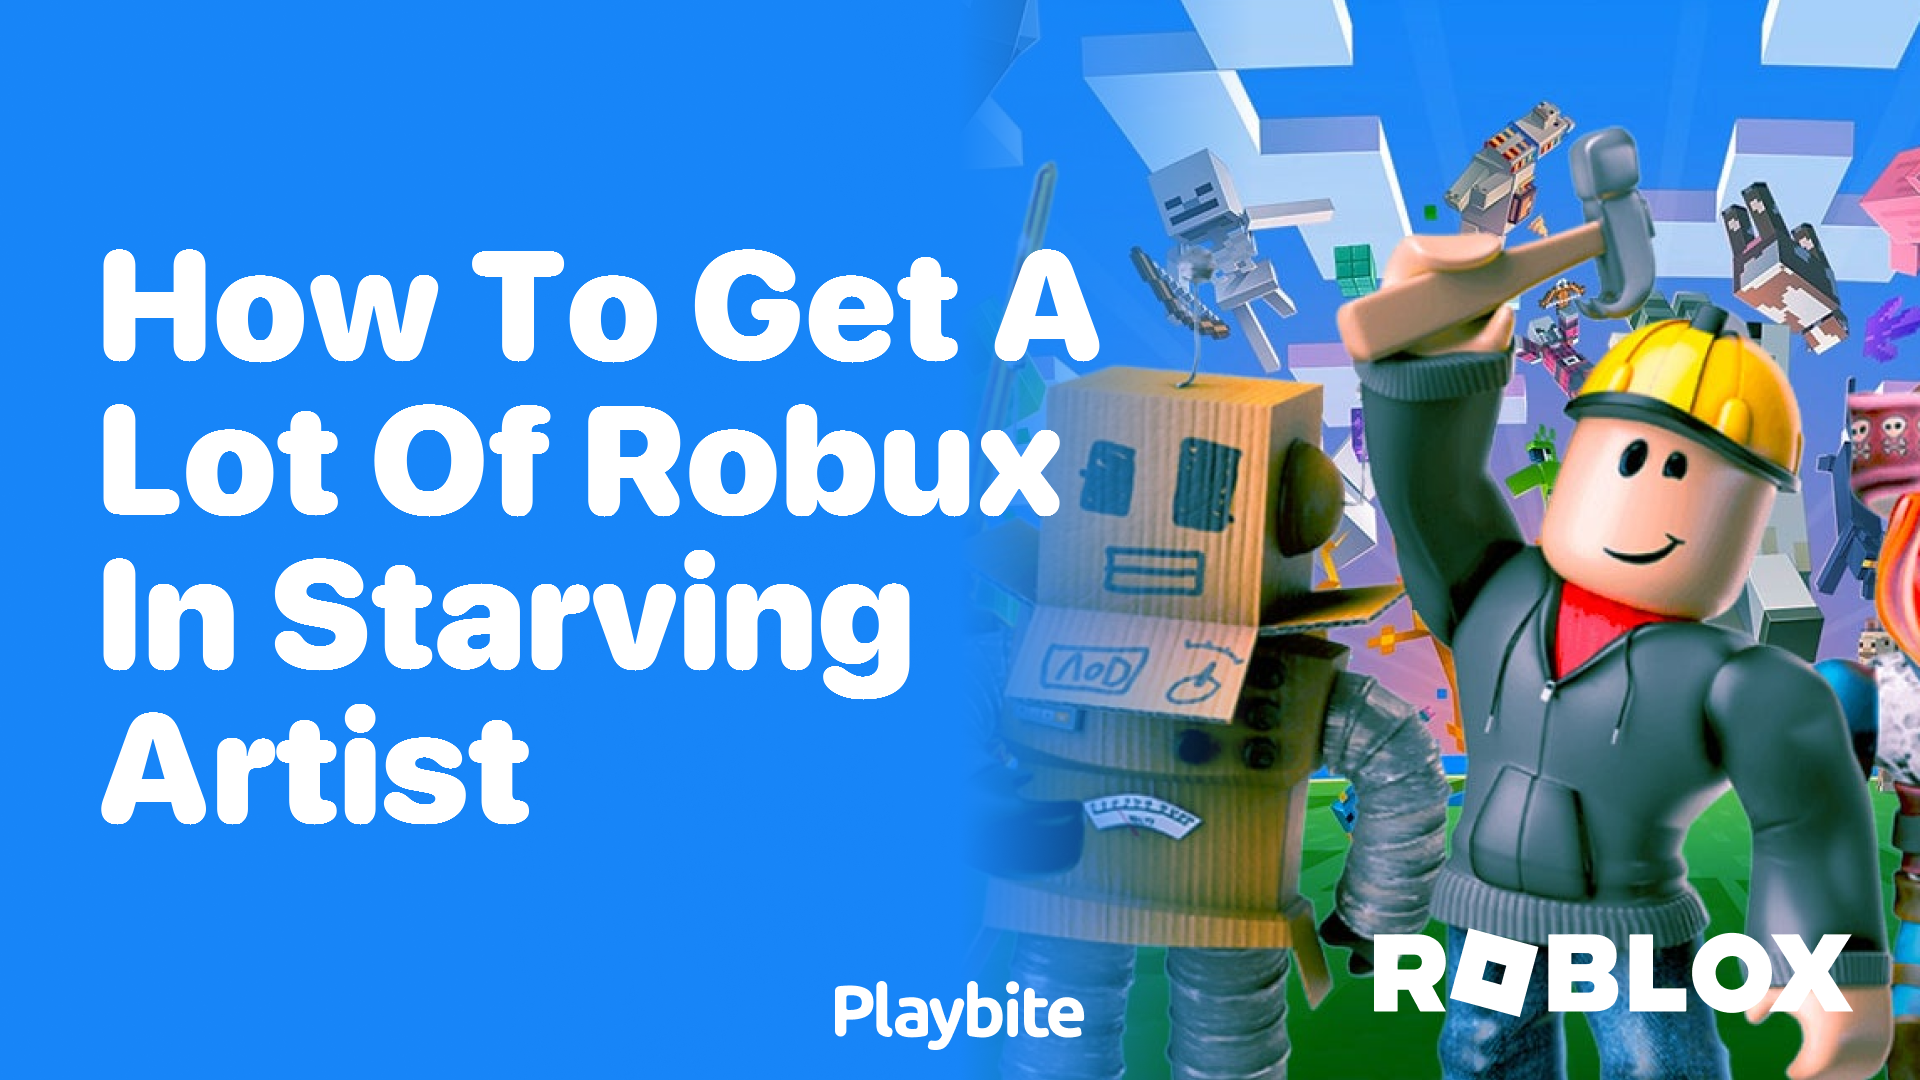 How to Get a Lot of Robux in Starving Artist